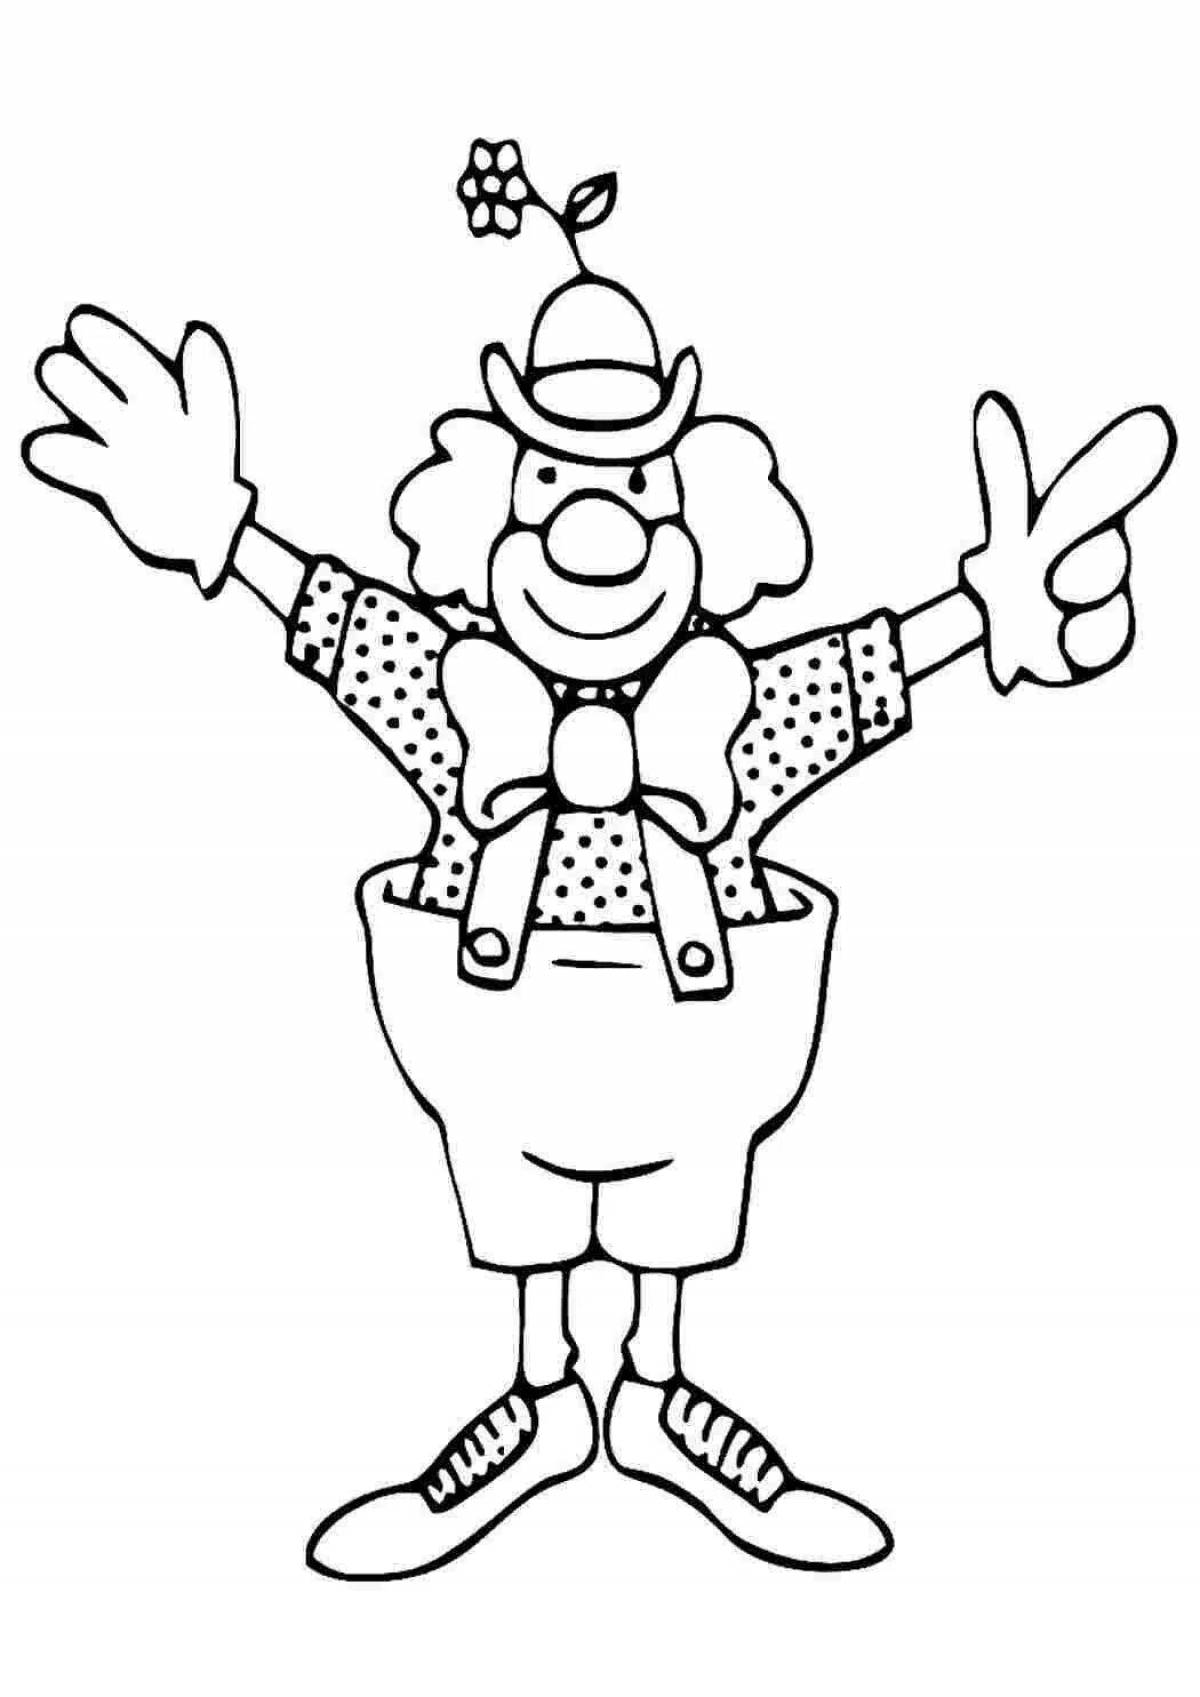 Holiday clown coloring book for kids